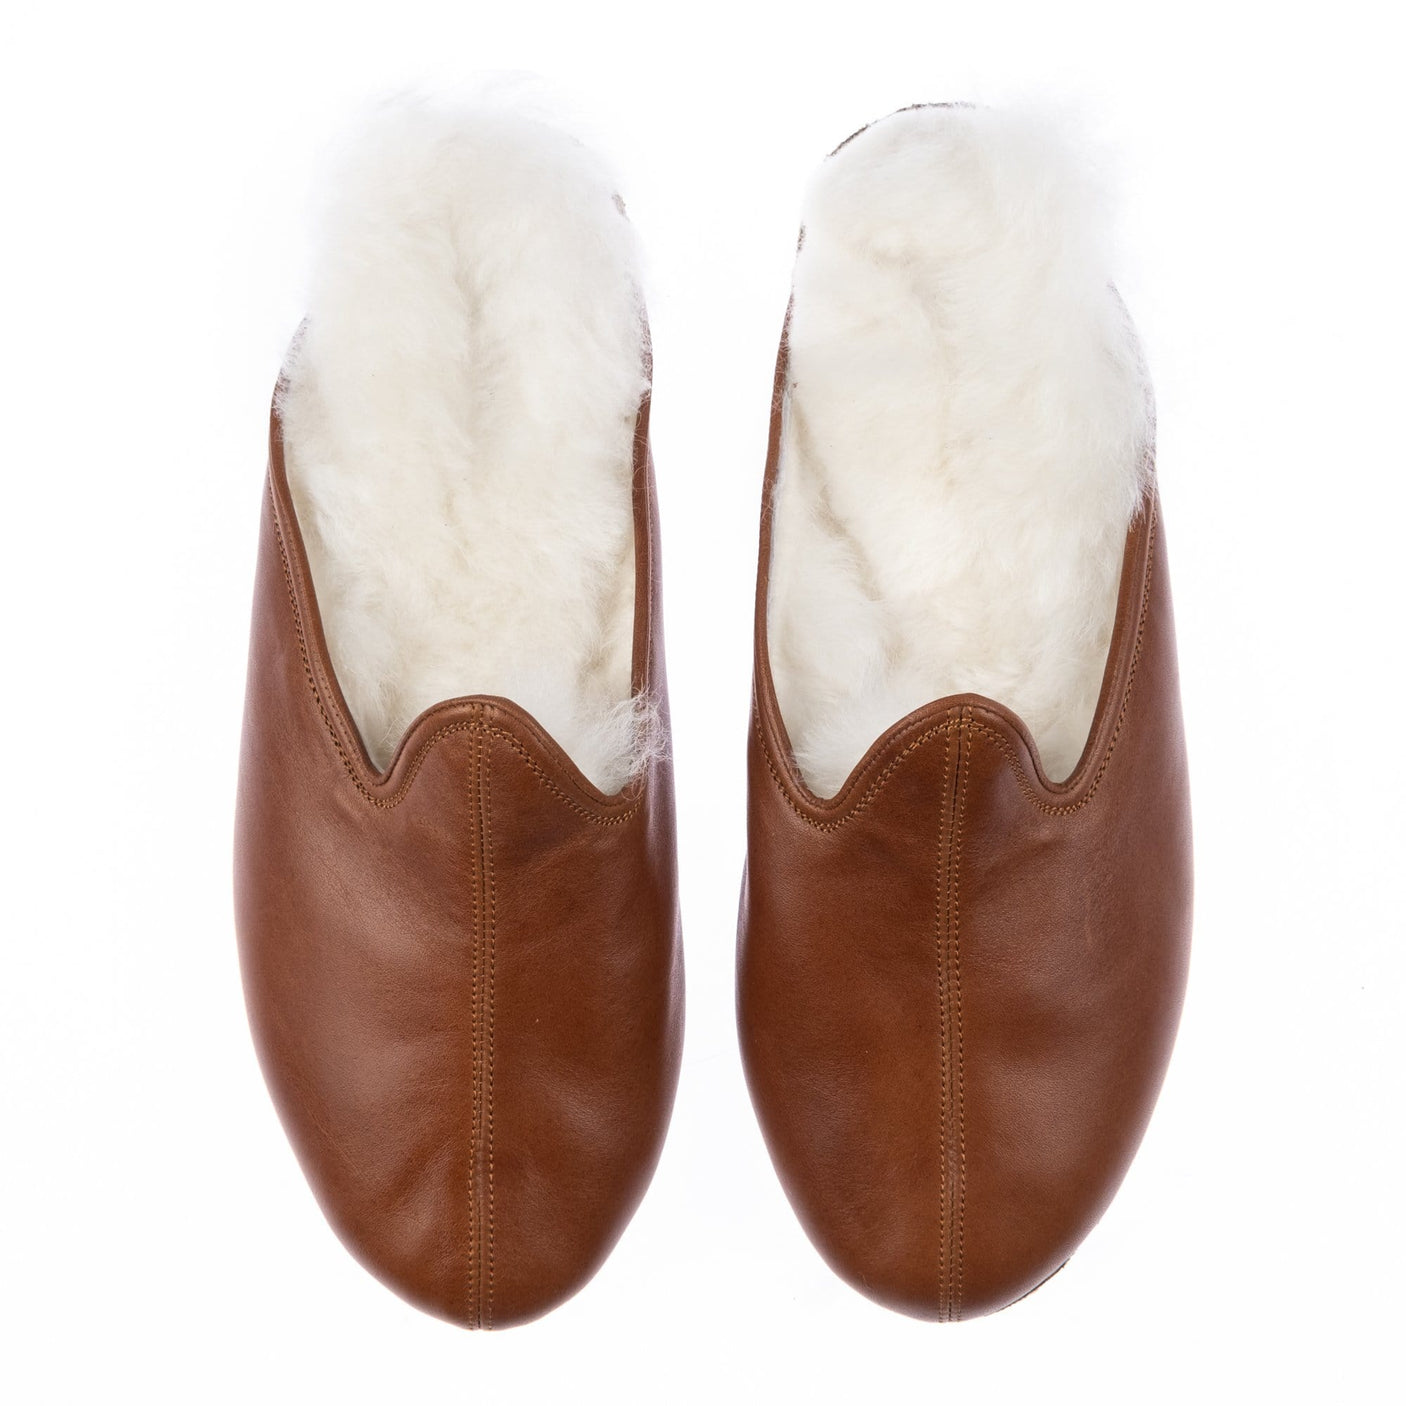 Women's Peru All Leather Shearling Slippers